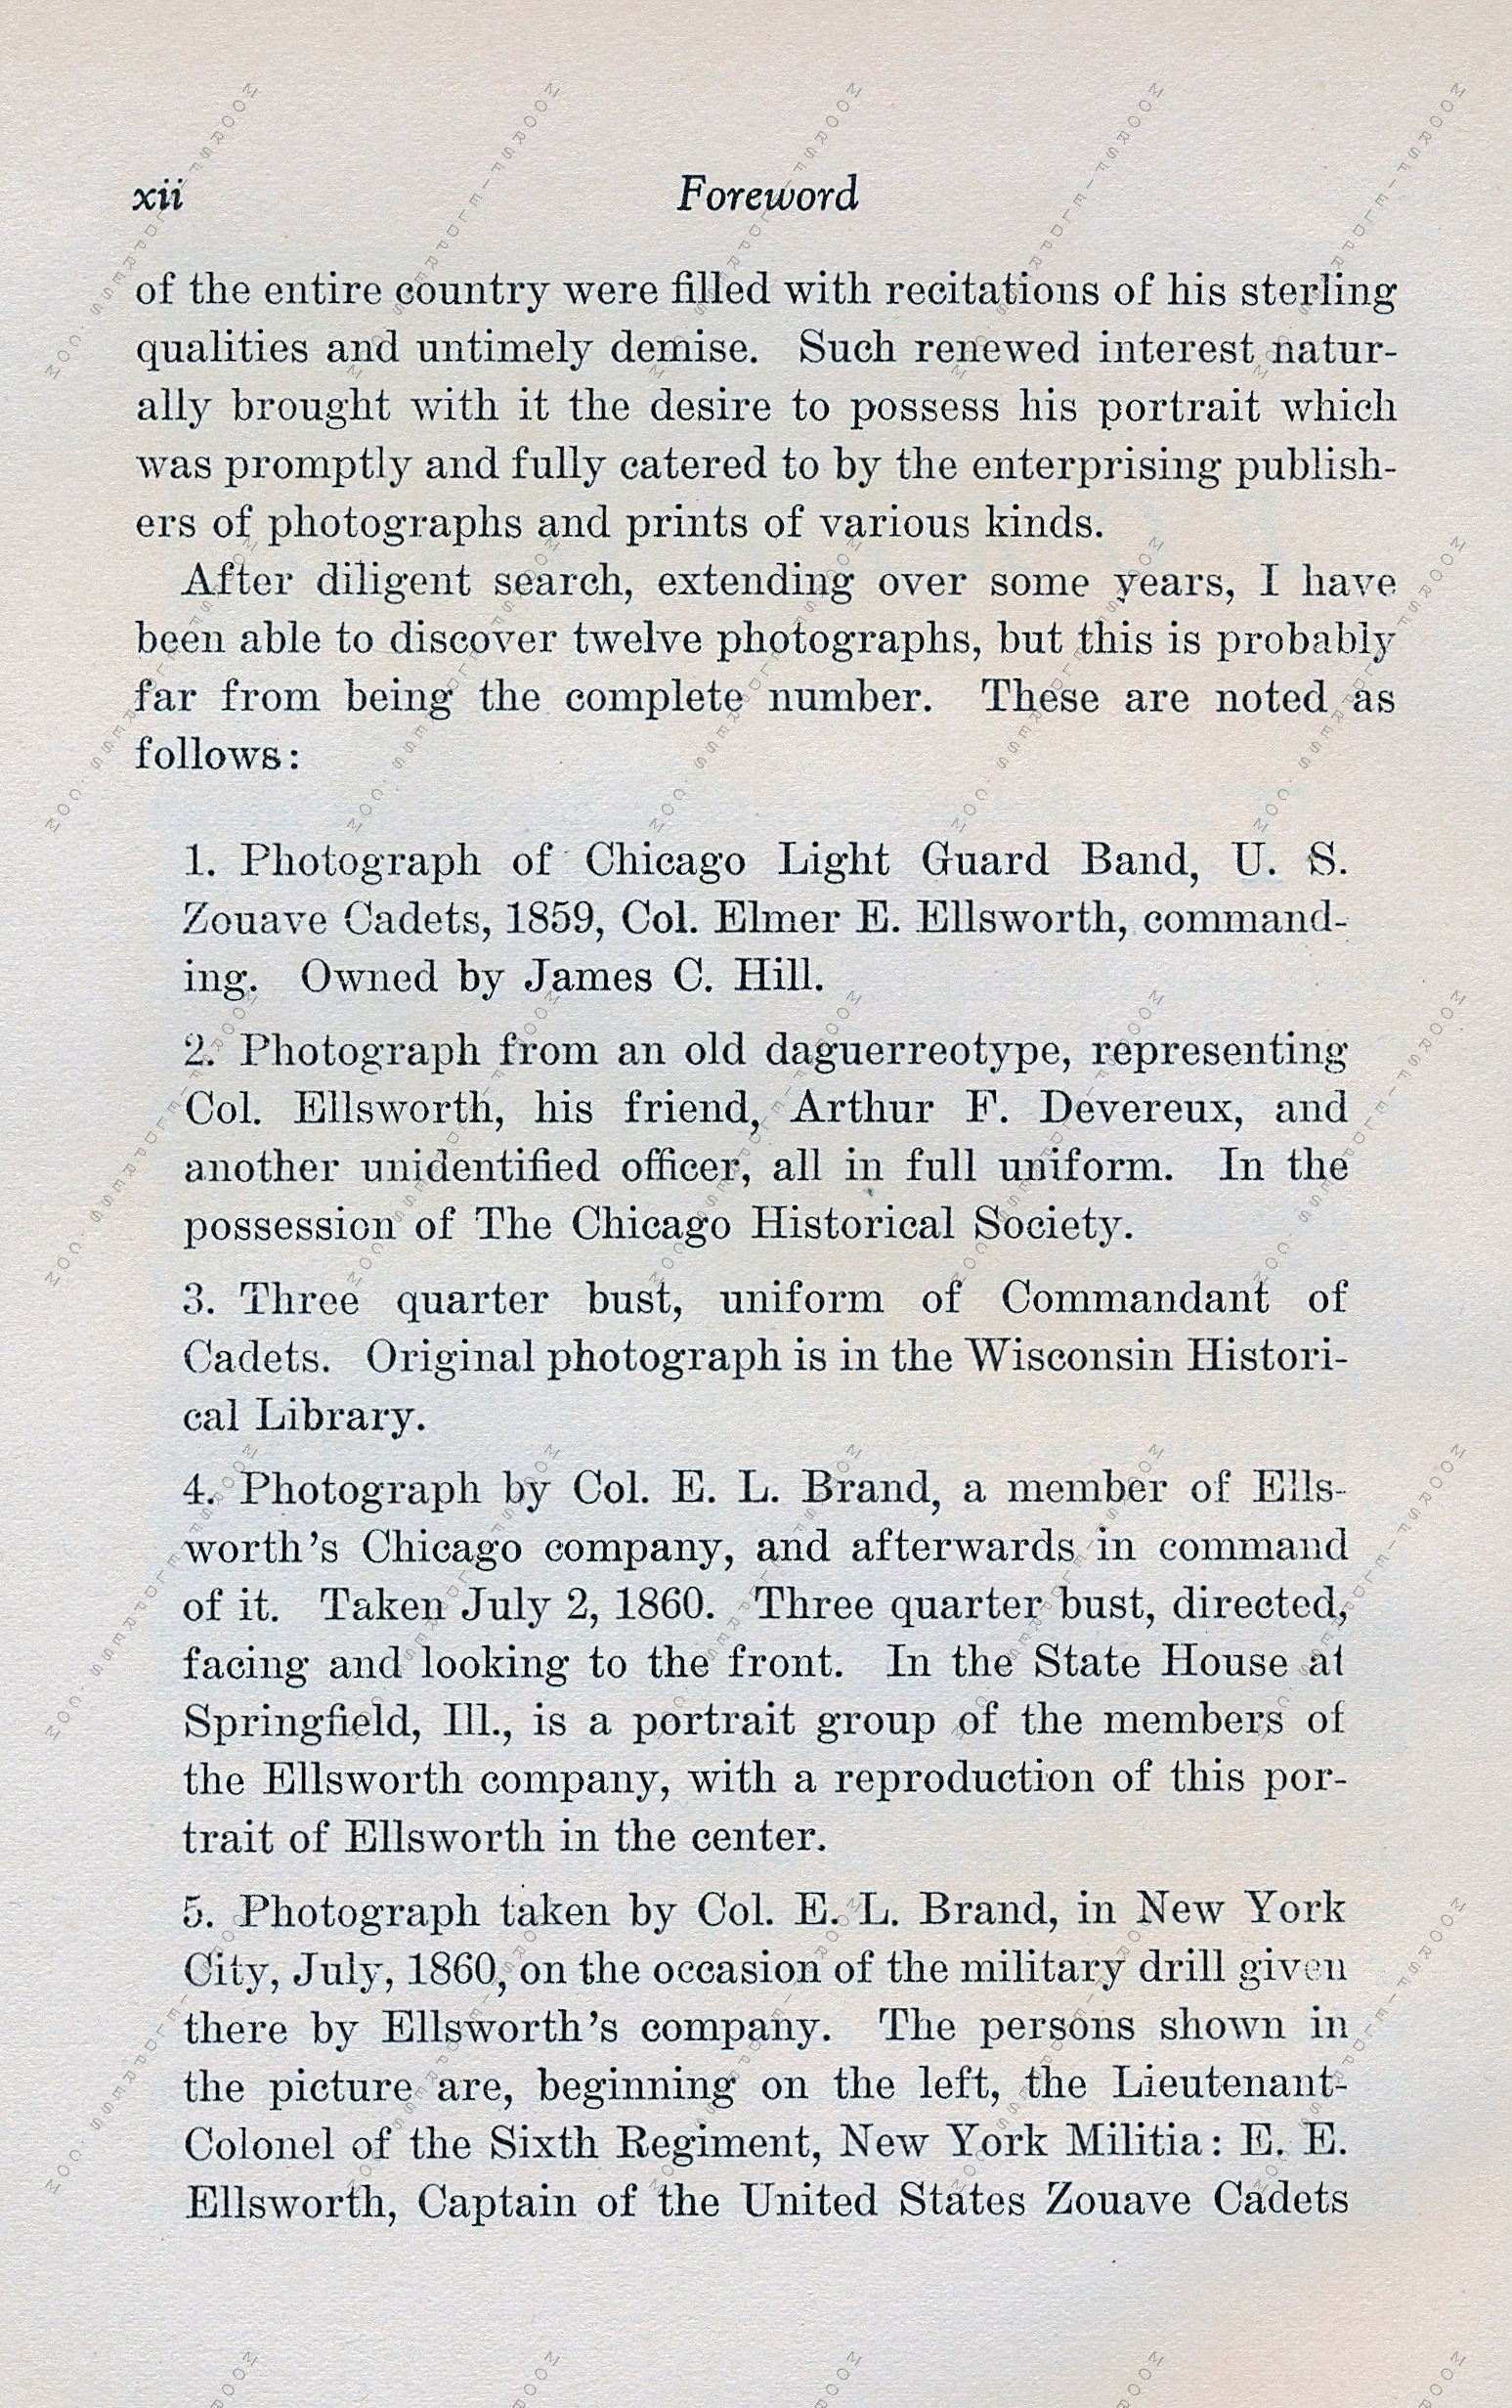 Winfred Porter
                Truesdell and his Printed Books by the Troutsdale Press